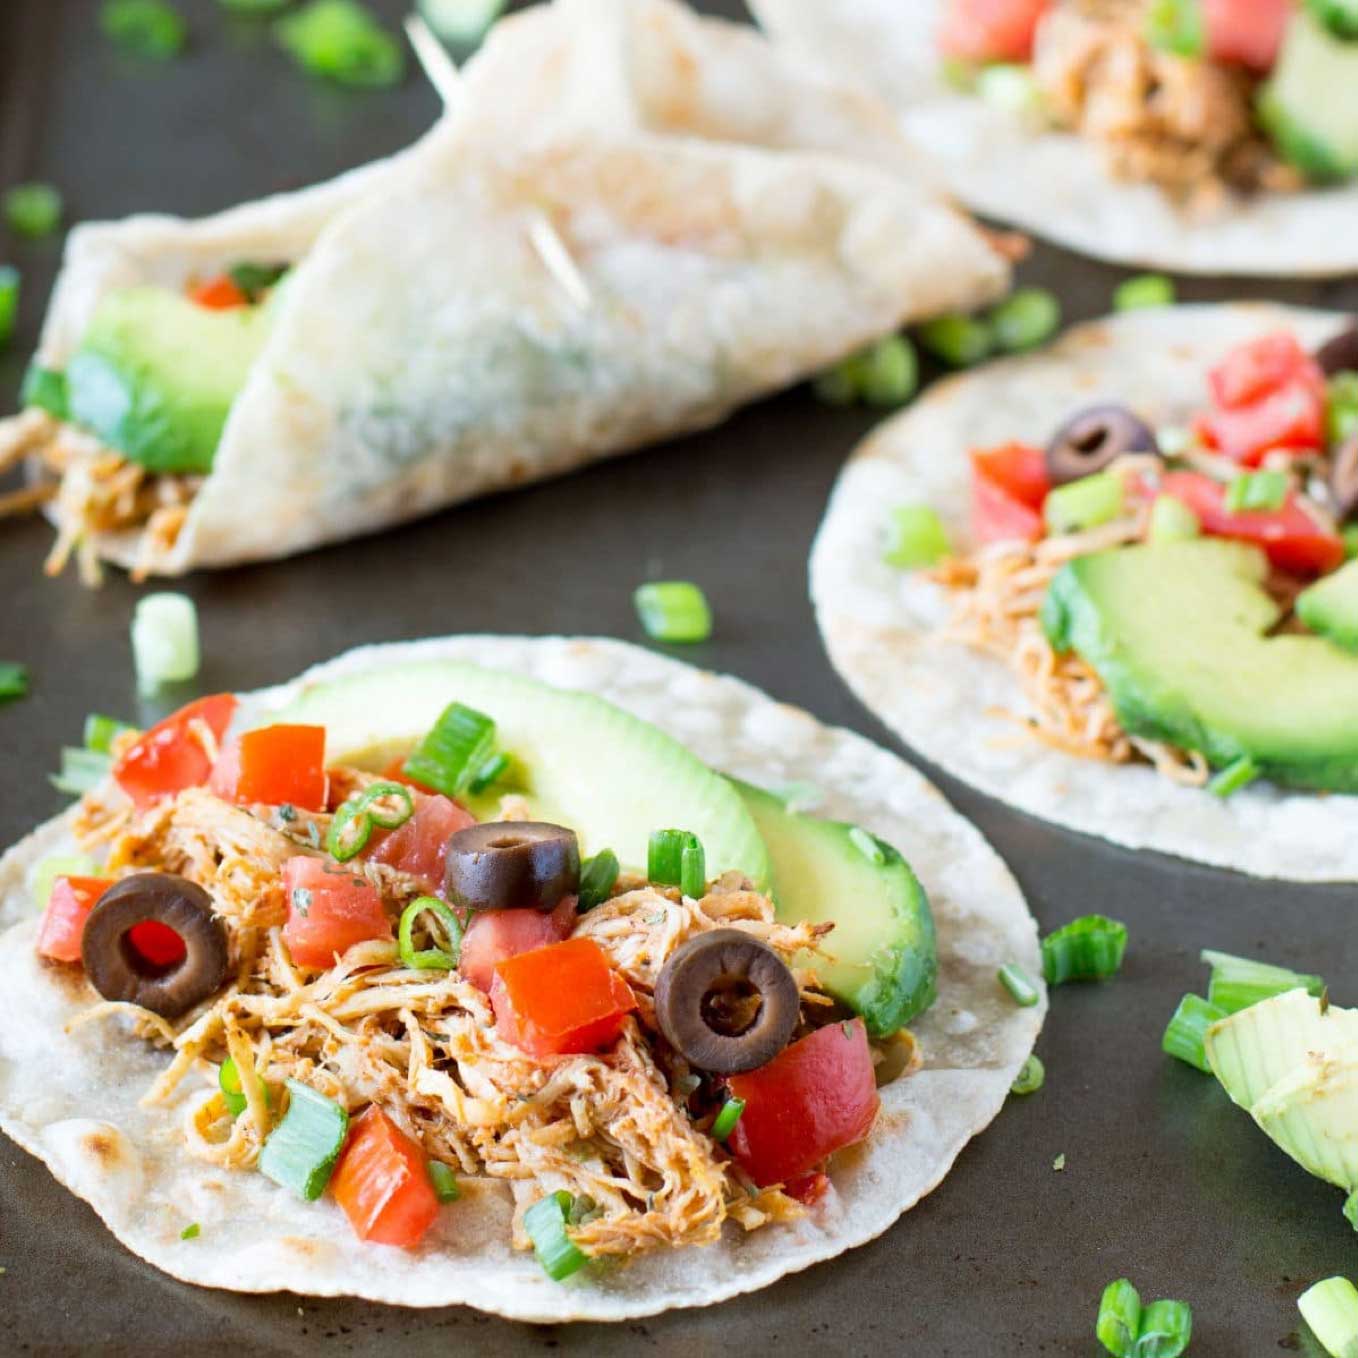 Love easy chicken recipes? We’ve got lots of ‘em for ya – like these Chipotle Chicken Tacos from Kelli at Hungry Hobby - all made super-fast thanks to the Instant Pot!